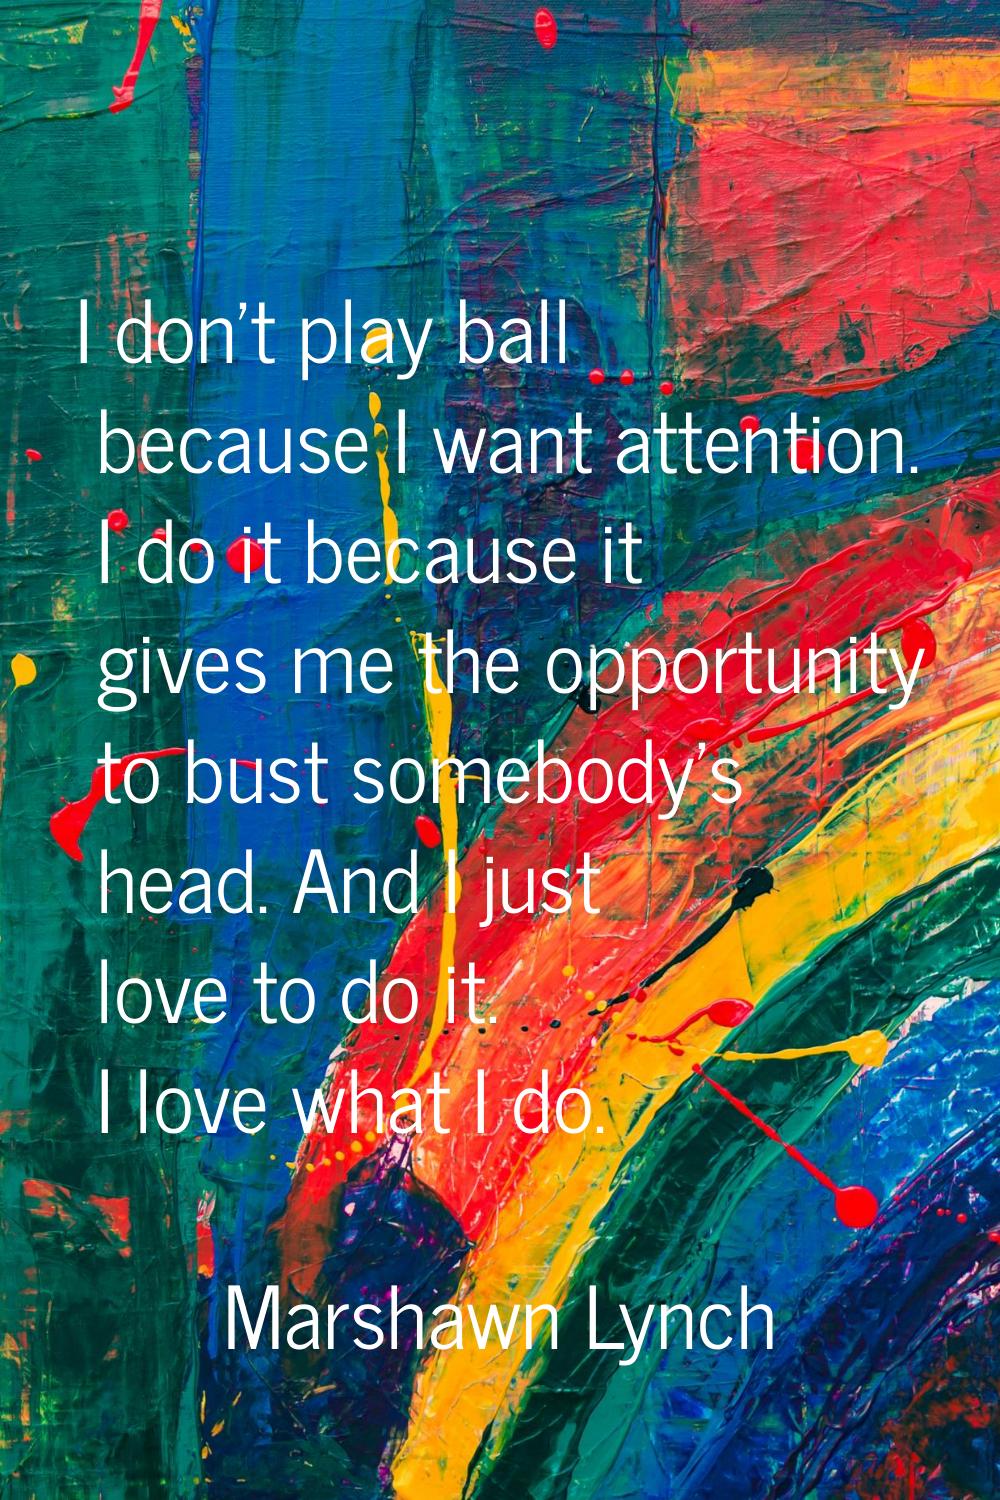 I don't play ball because I want attention. I do it because it gives me the opportunity to bust som